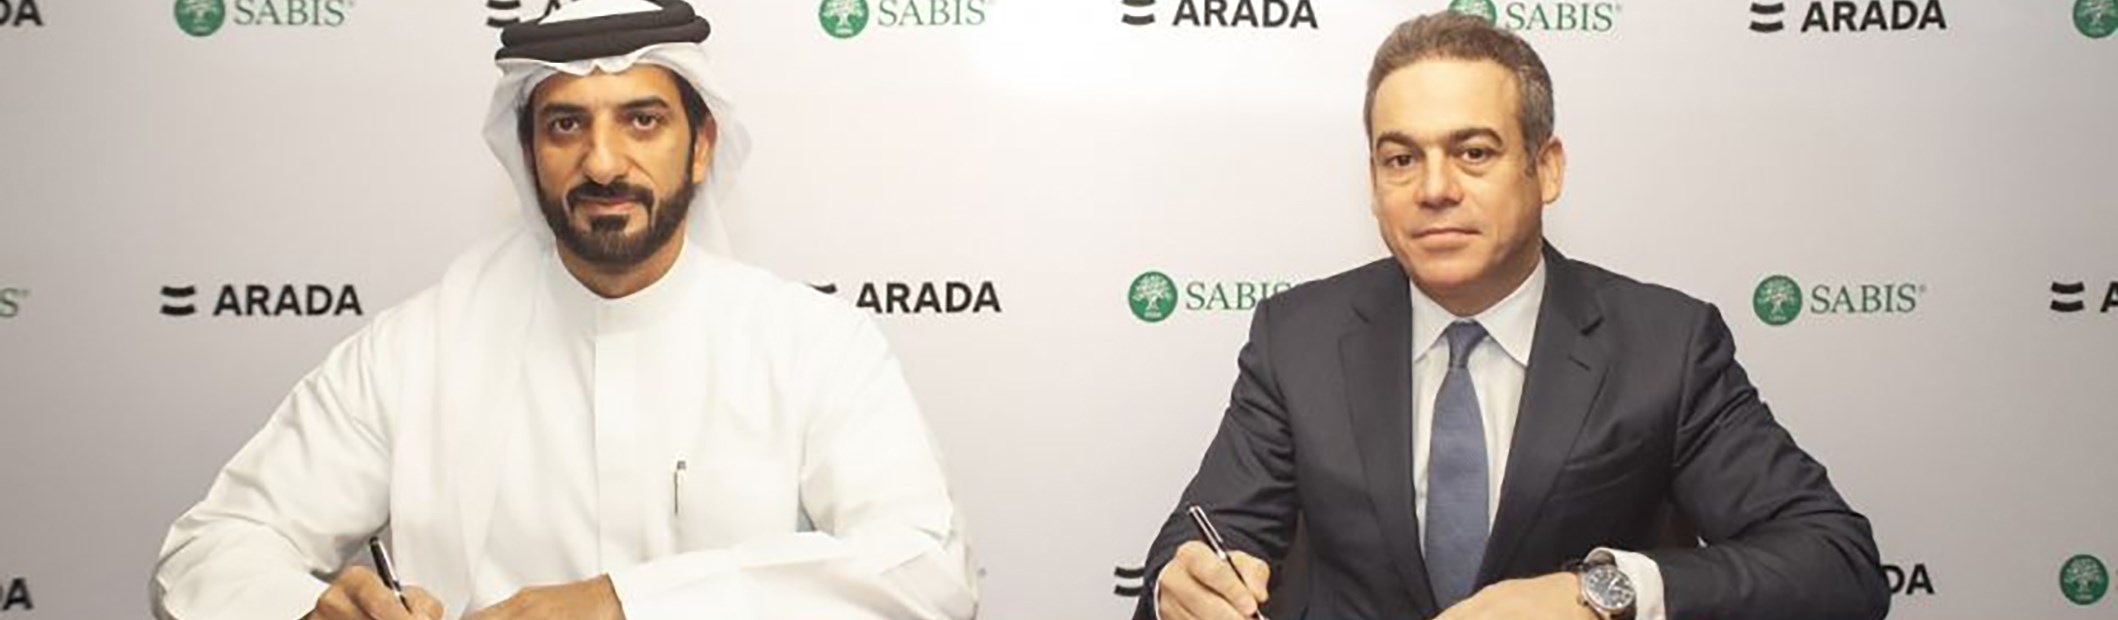 Arada partners with SABIS® to launch K-12 international school in Aljada, Sharjah’s largest lifestyle megaproject